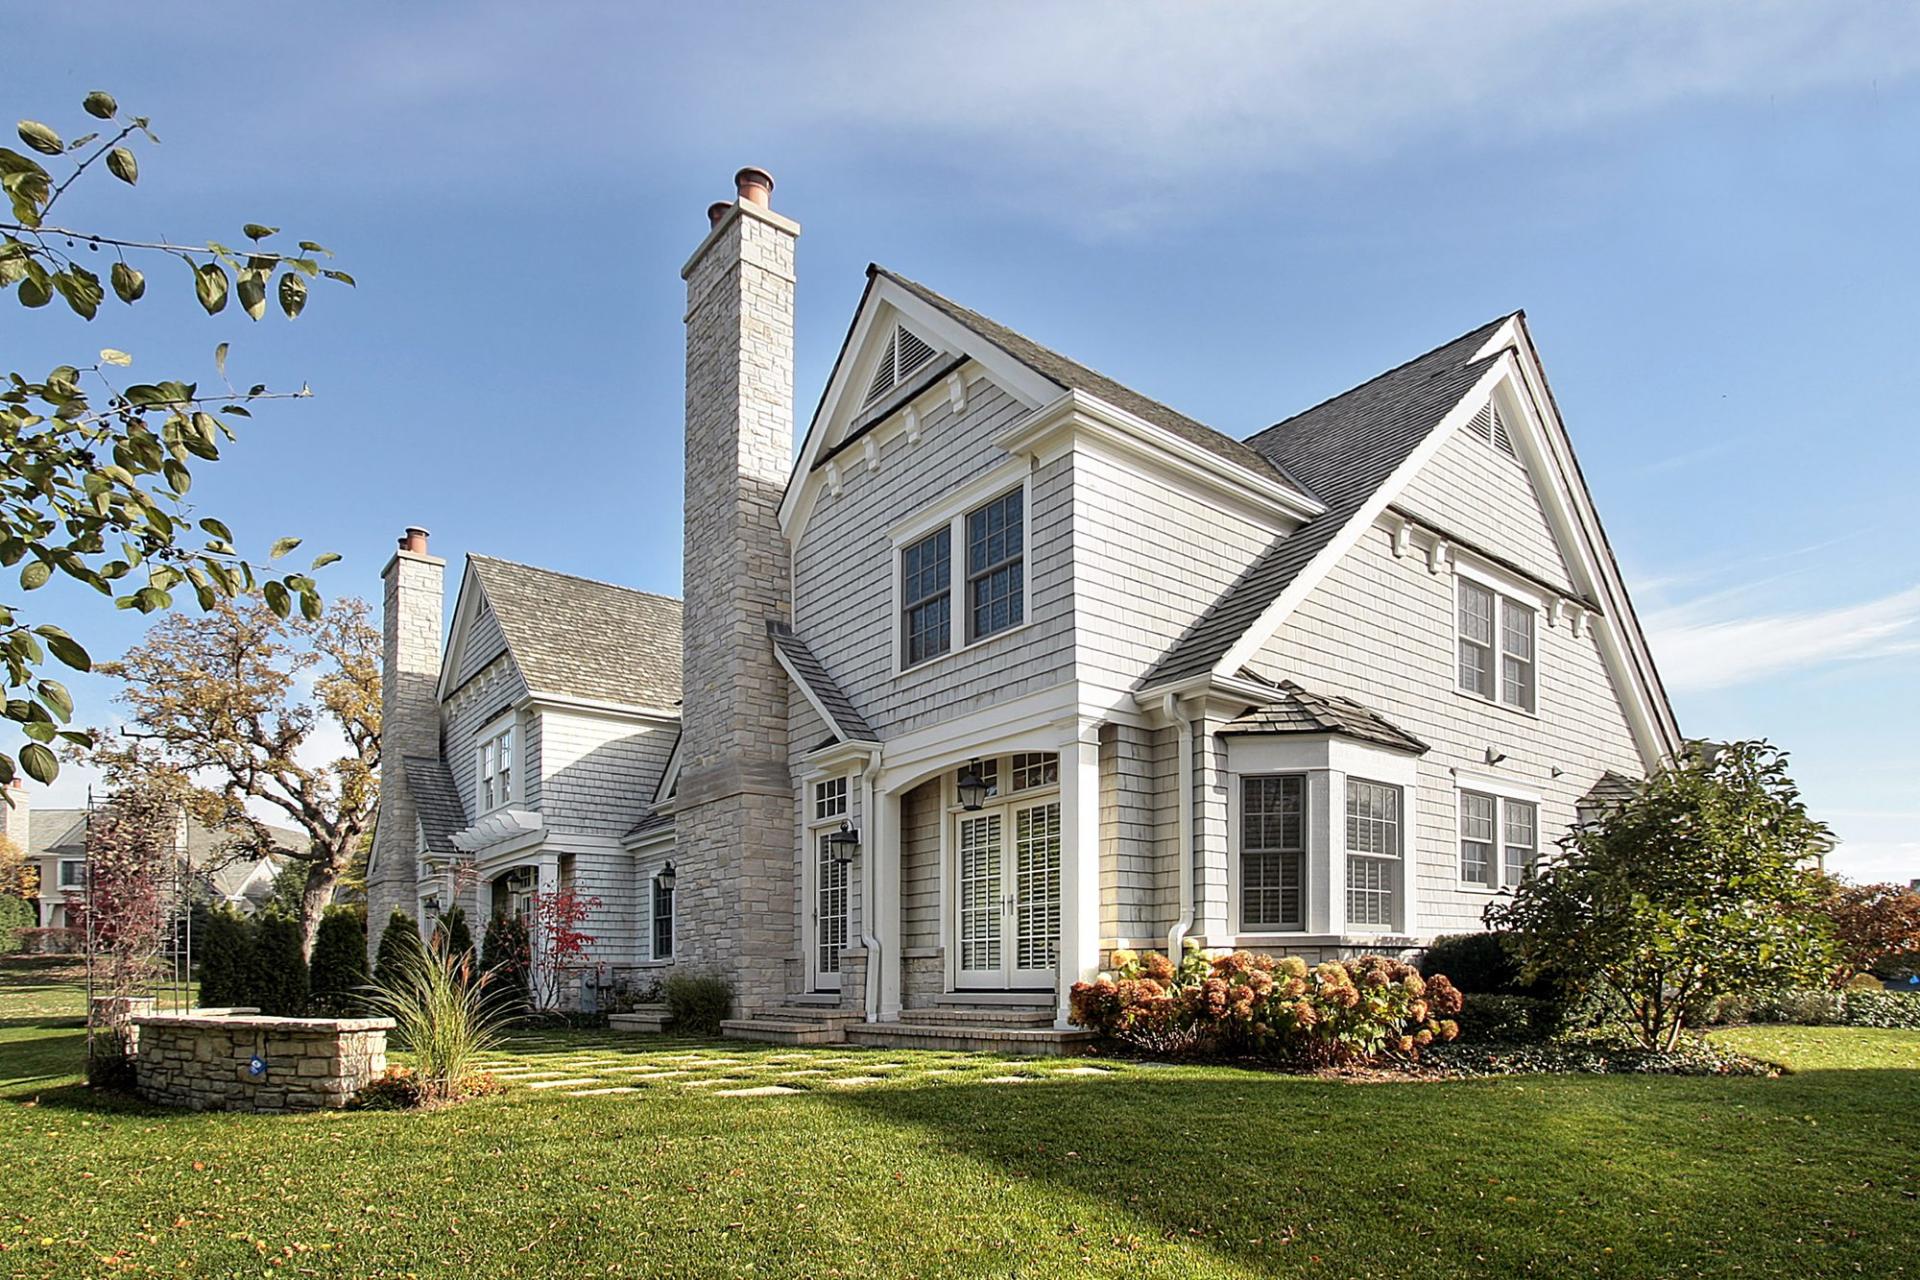 English manor inspired home with horizontal siding in a neutral tone and cedar shake roofing.